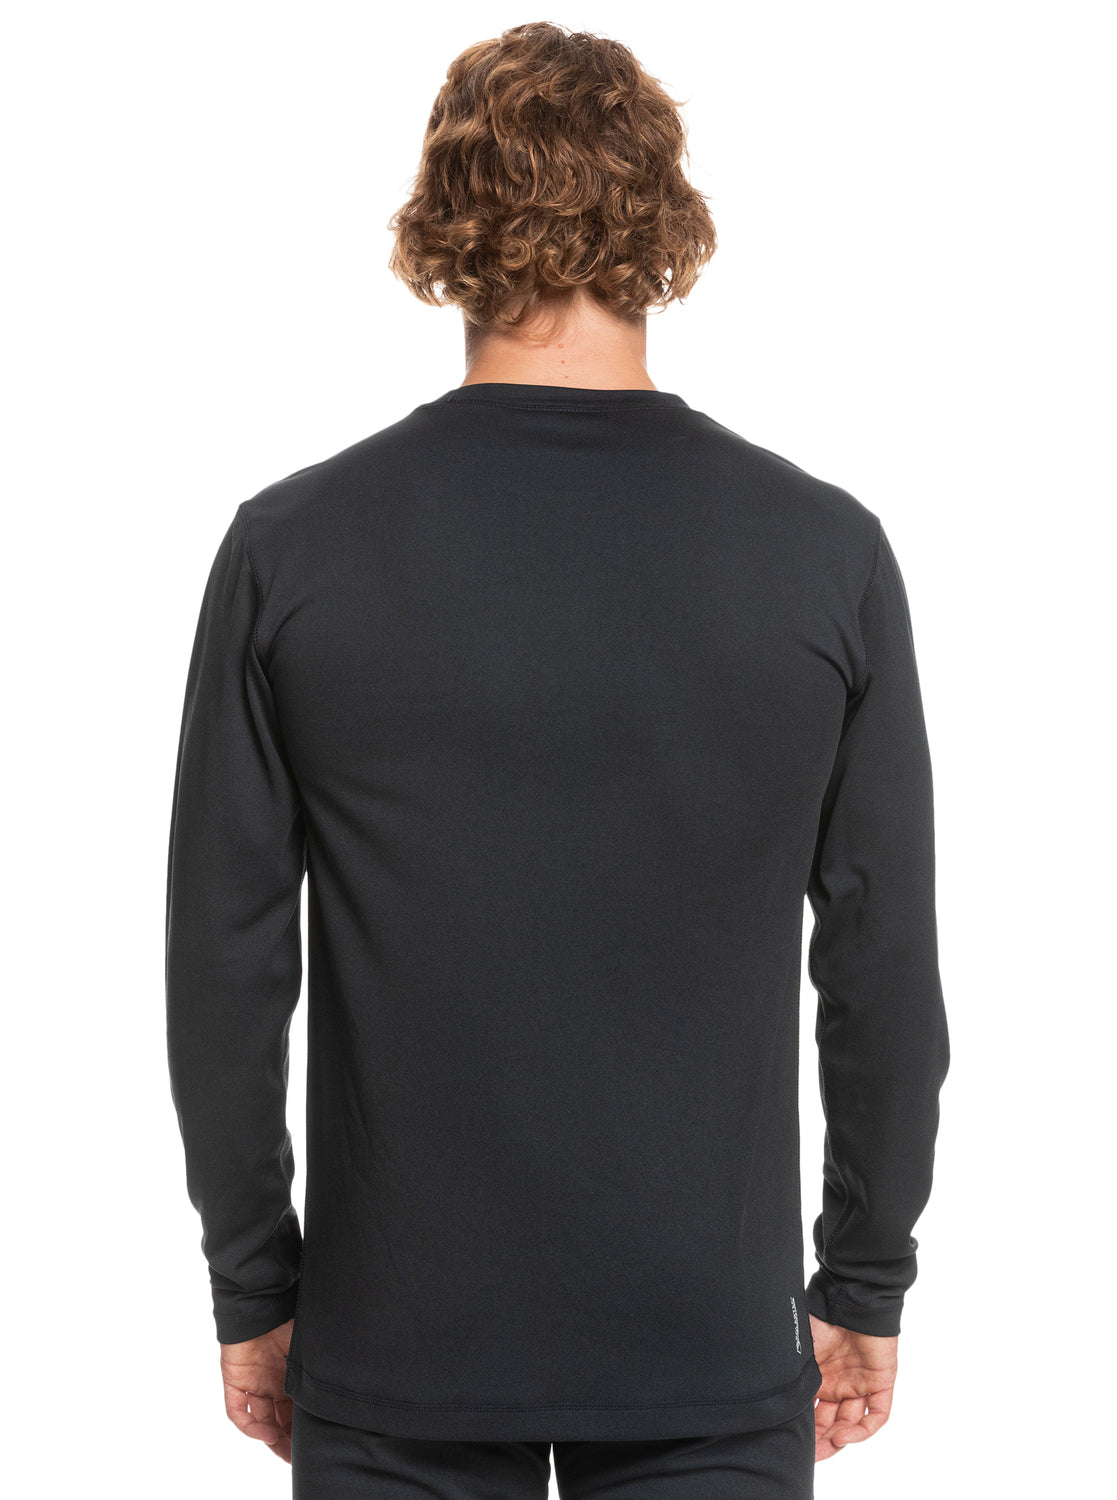 Territory Layer - Technical Long Sleeve Base Layer Top for Men